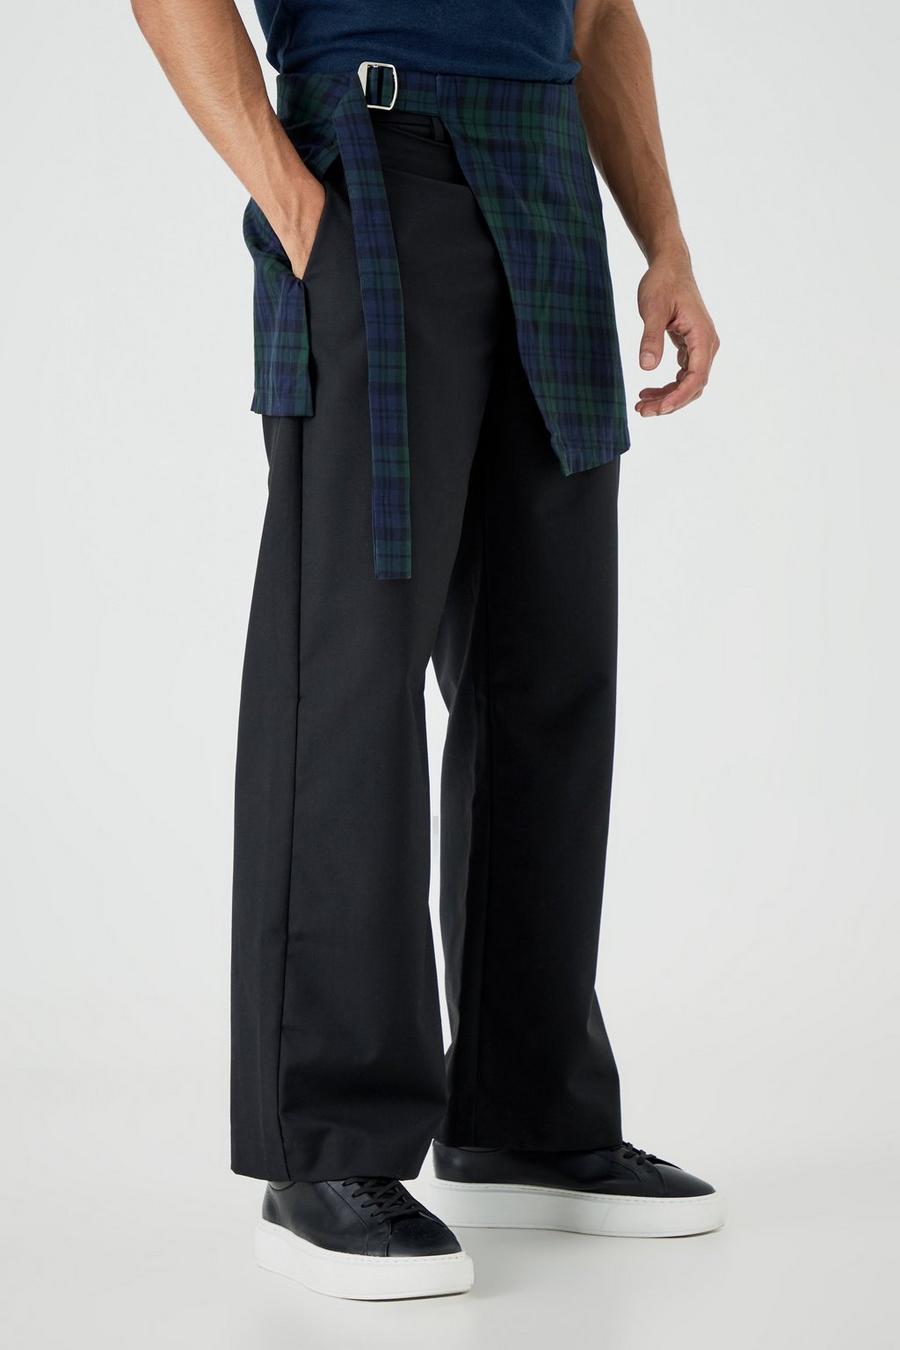 Black Plaid Skirt Tailored Trousers image number 1